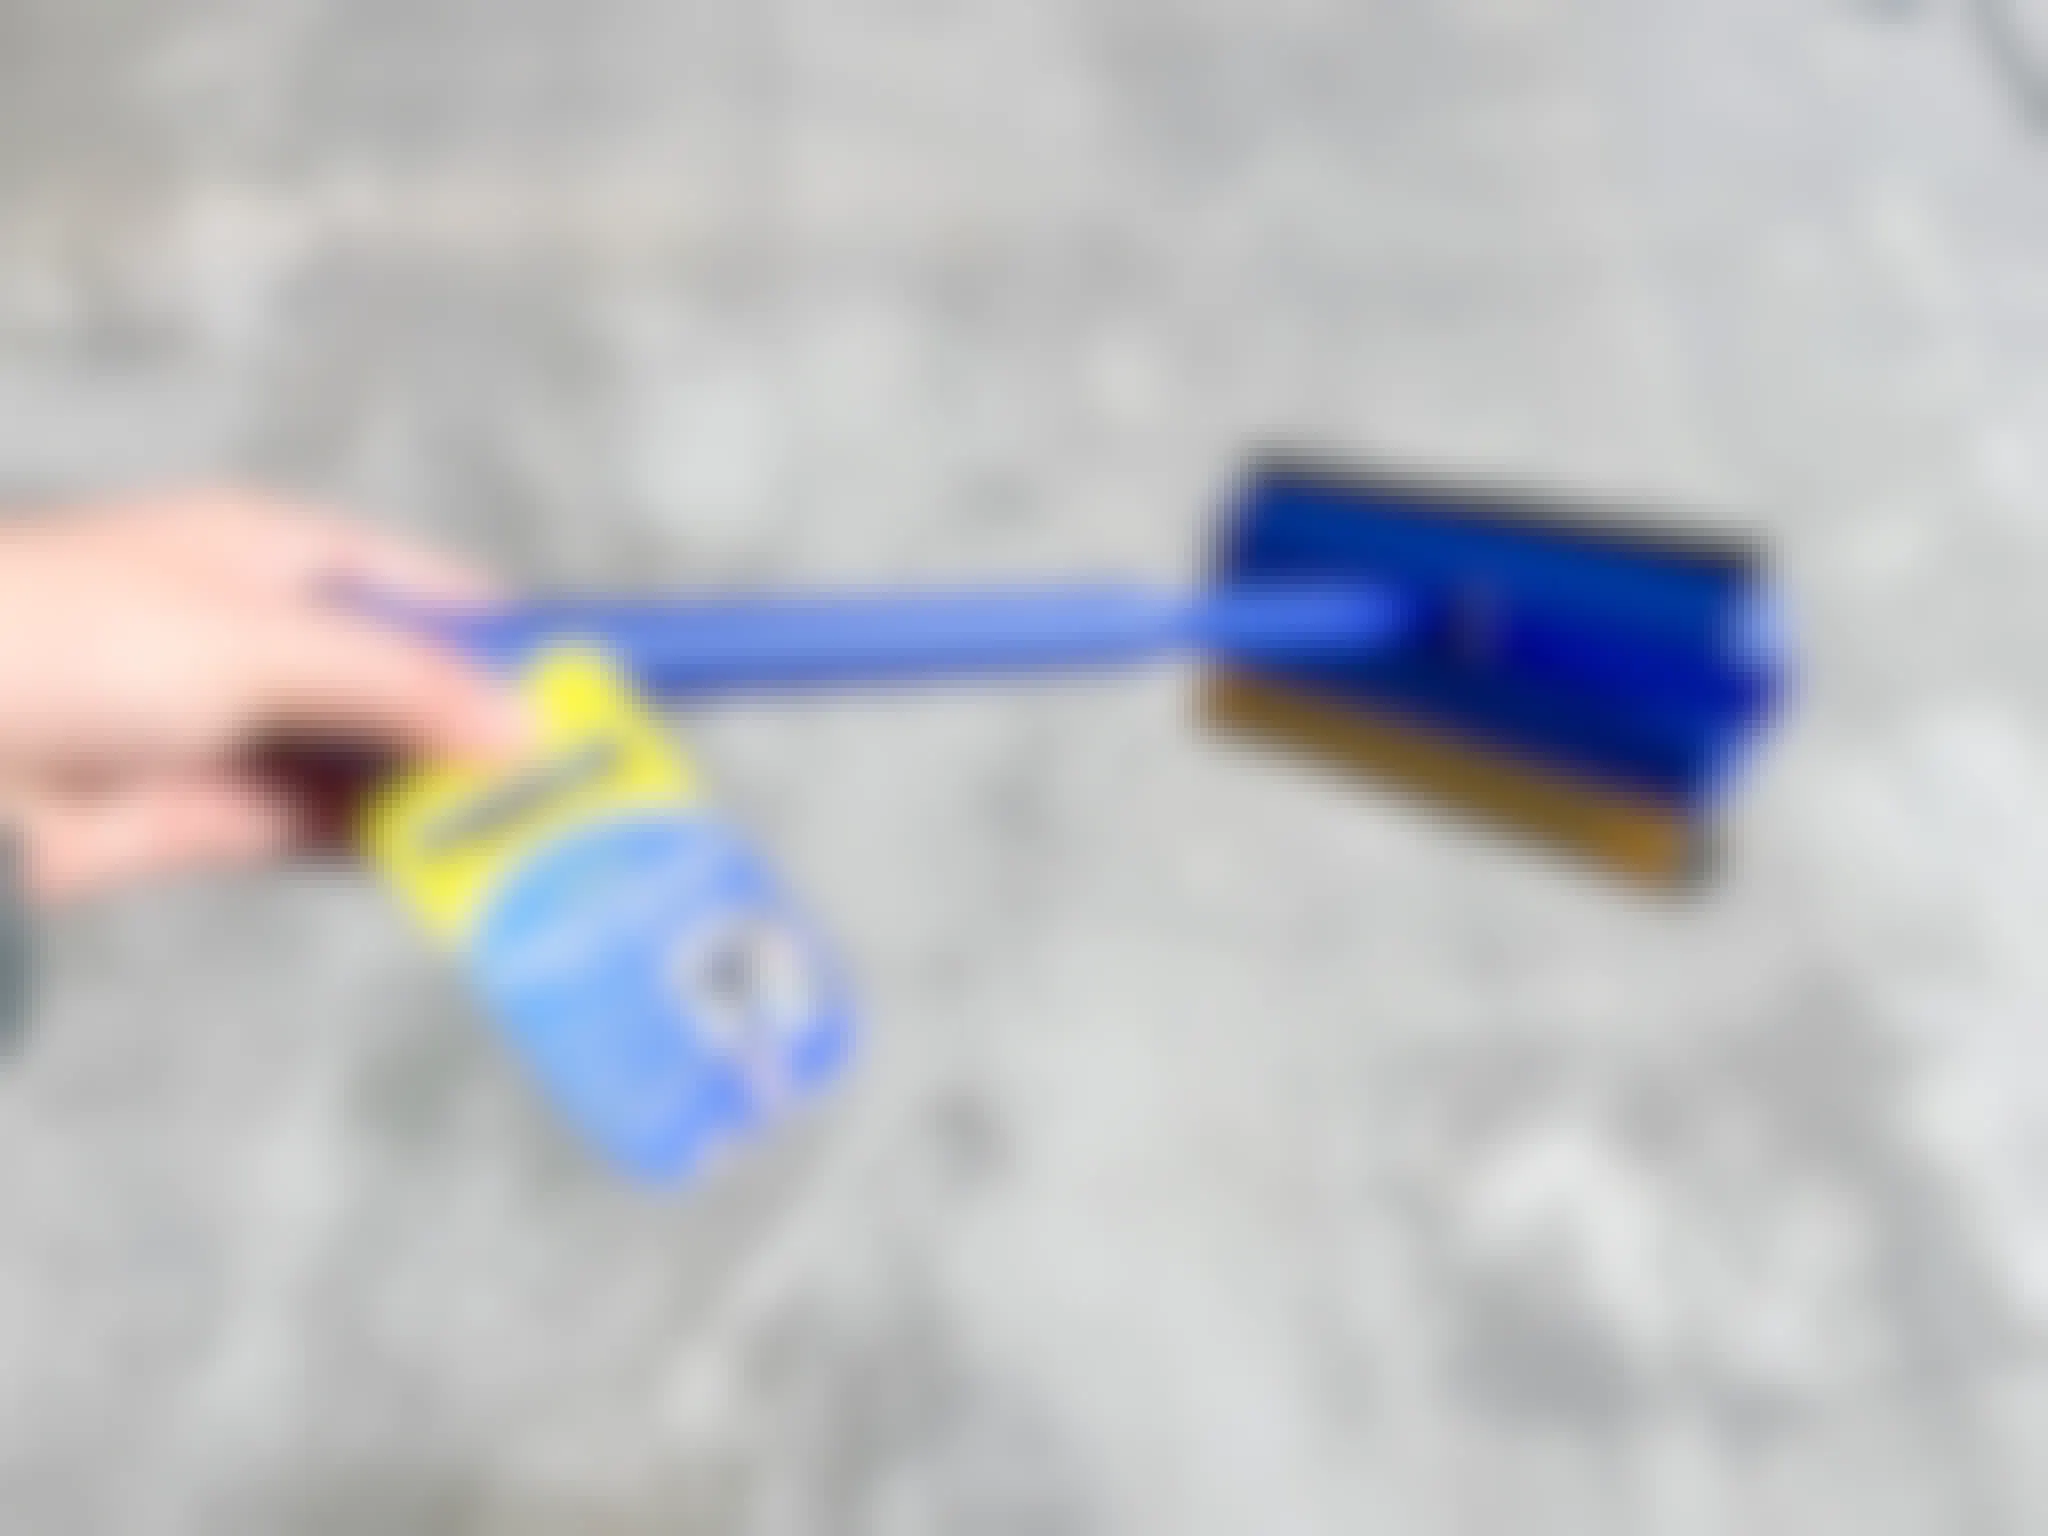 Rain-X 8" Squeegee, Only $4.87 on Amazon